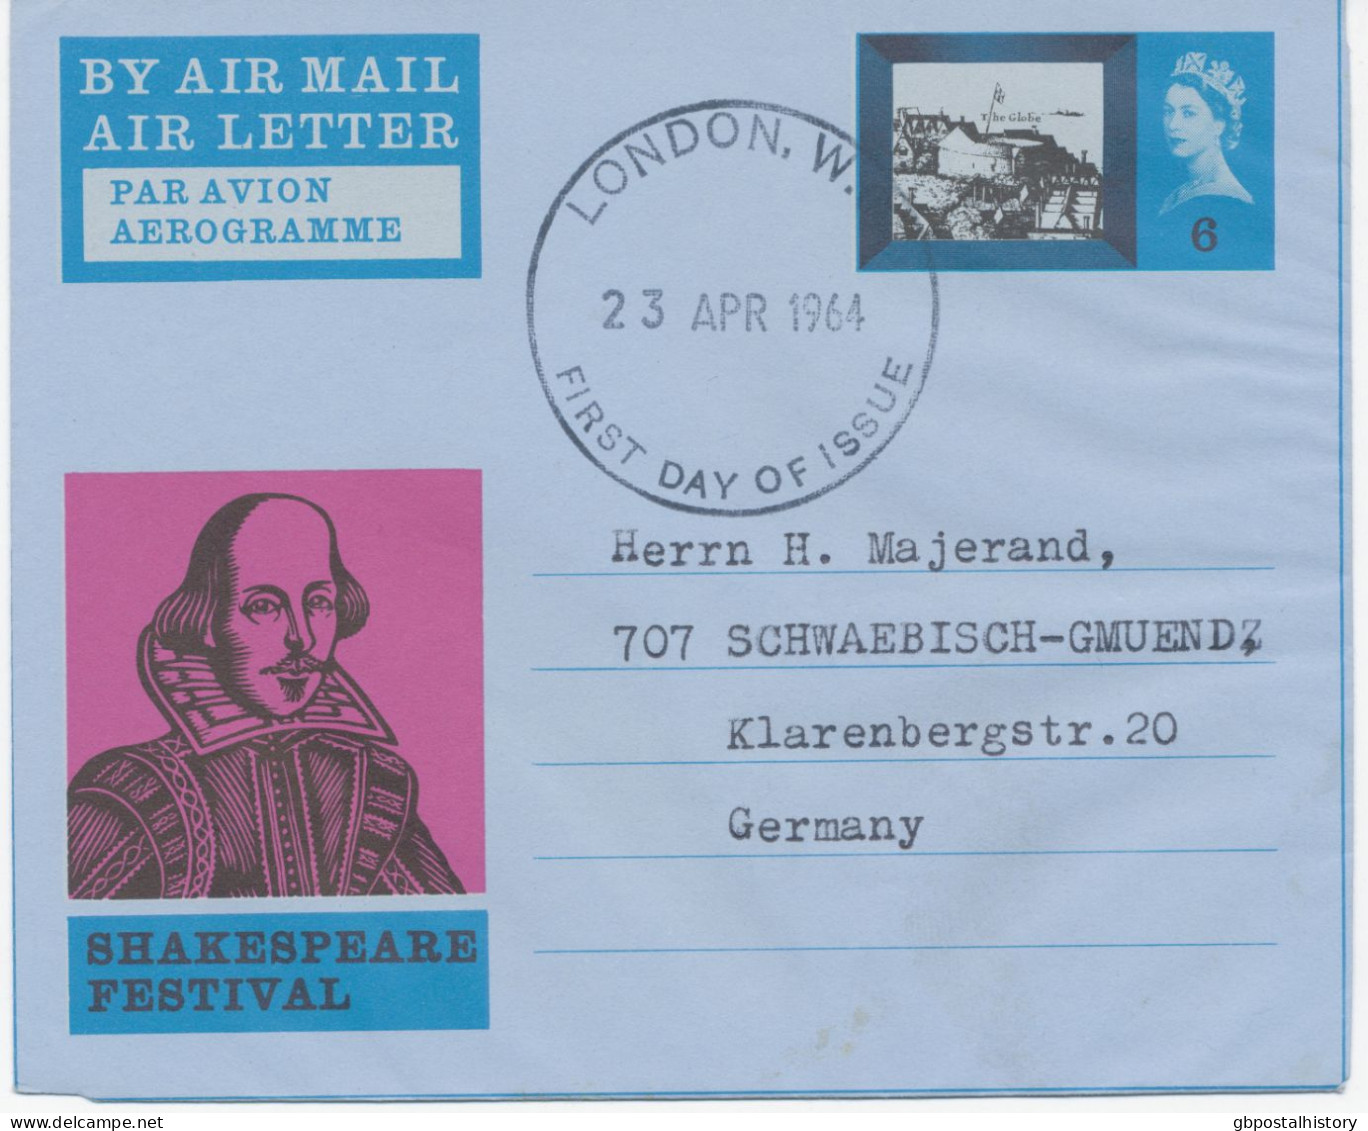 GB 23 APR 1964 SHAKESPEARE FESTIVAL 6d AIR LETTERS FDC's (BOTH!!) CDS 37mm FDI LONDON.W. / FIRST DAY OF ISSUE - Correct - Brieven En Documenten